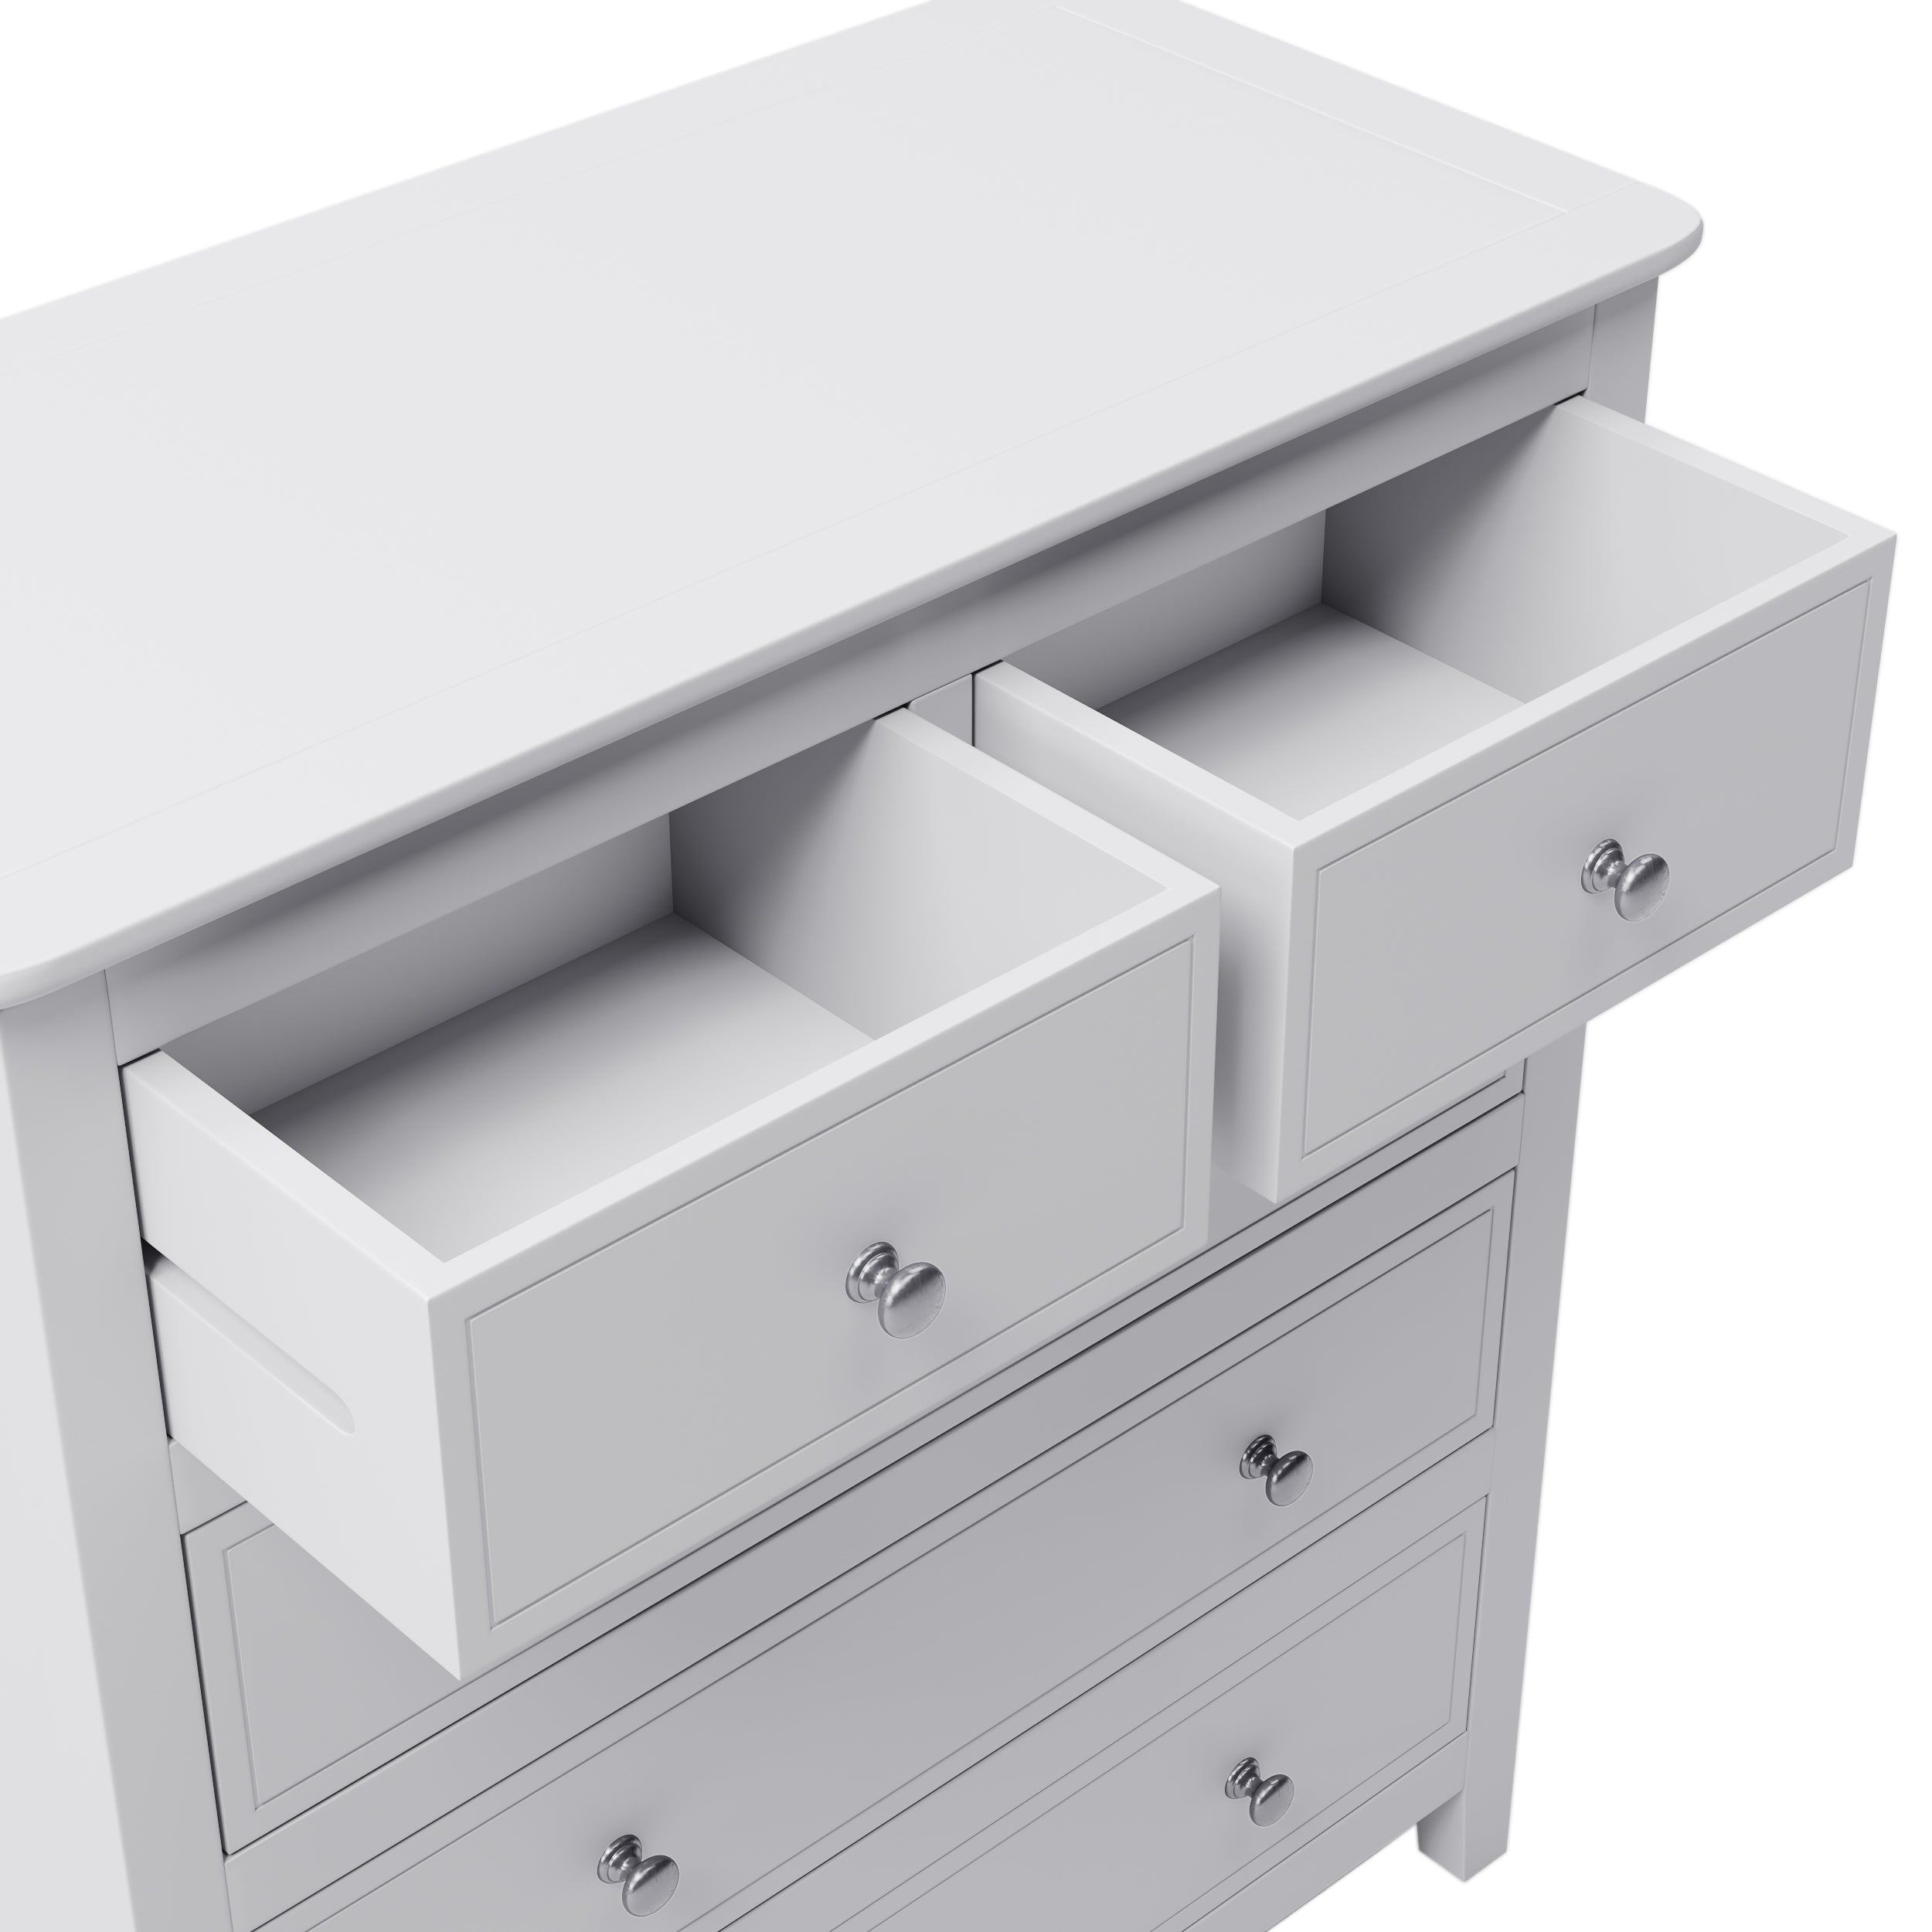 5 Drawers Solid Wood Chest in (White)